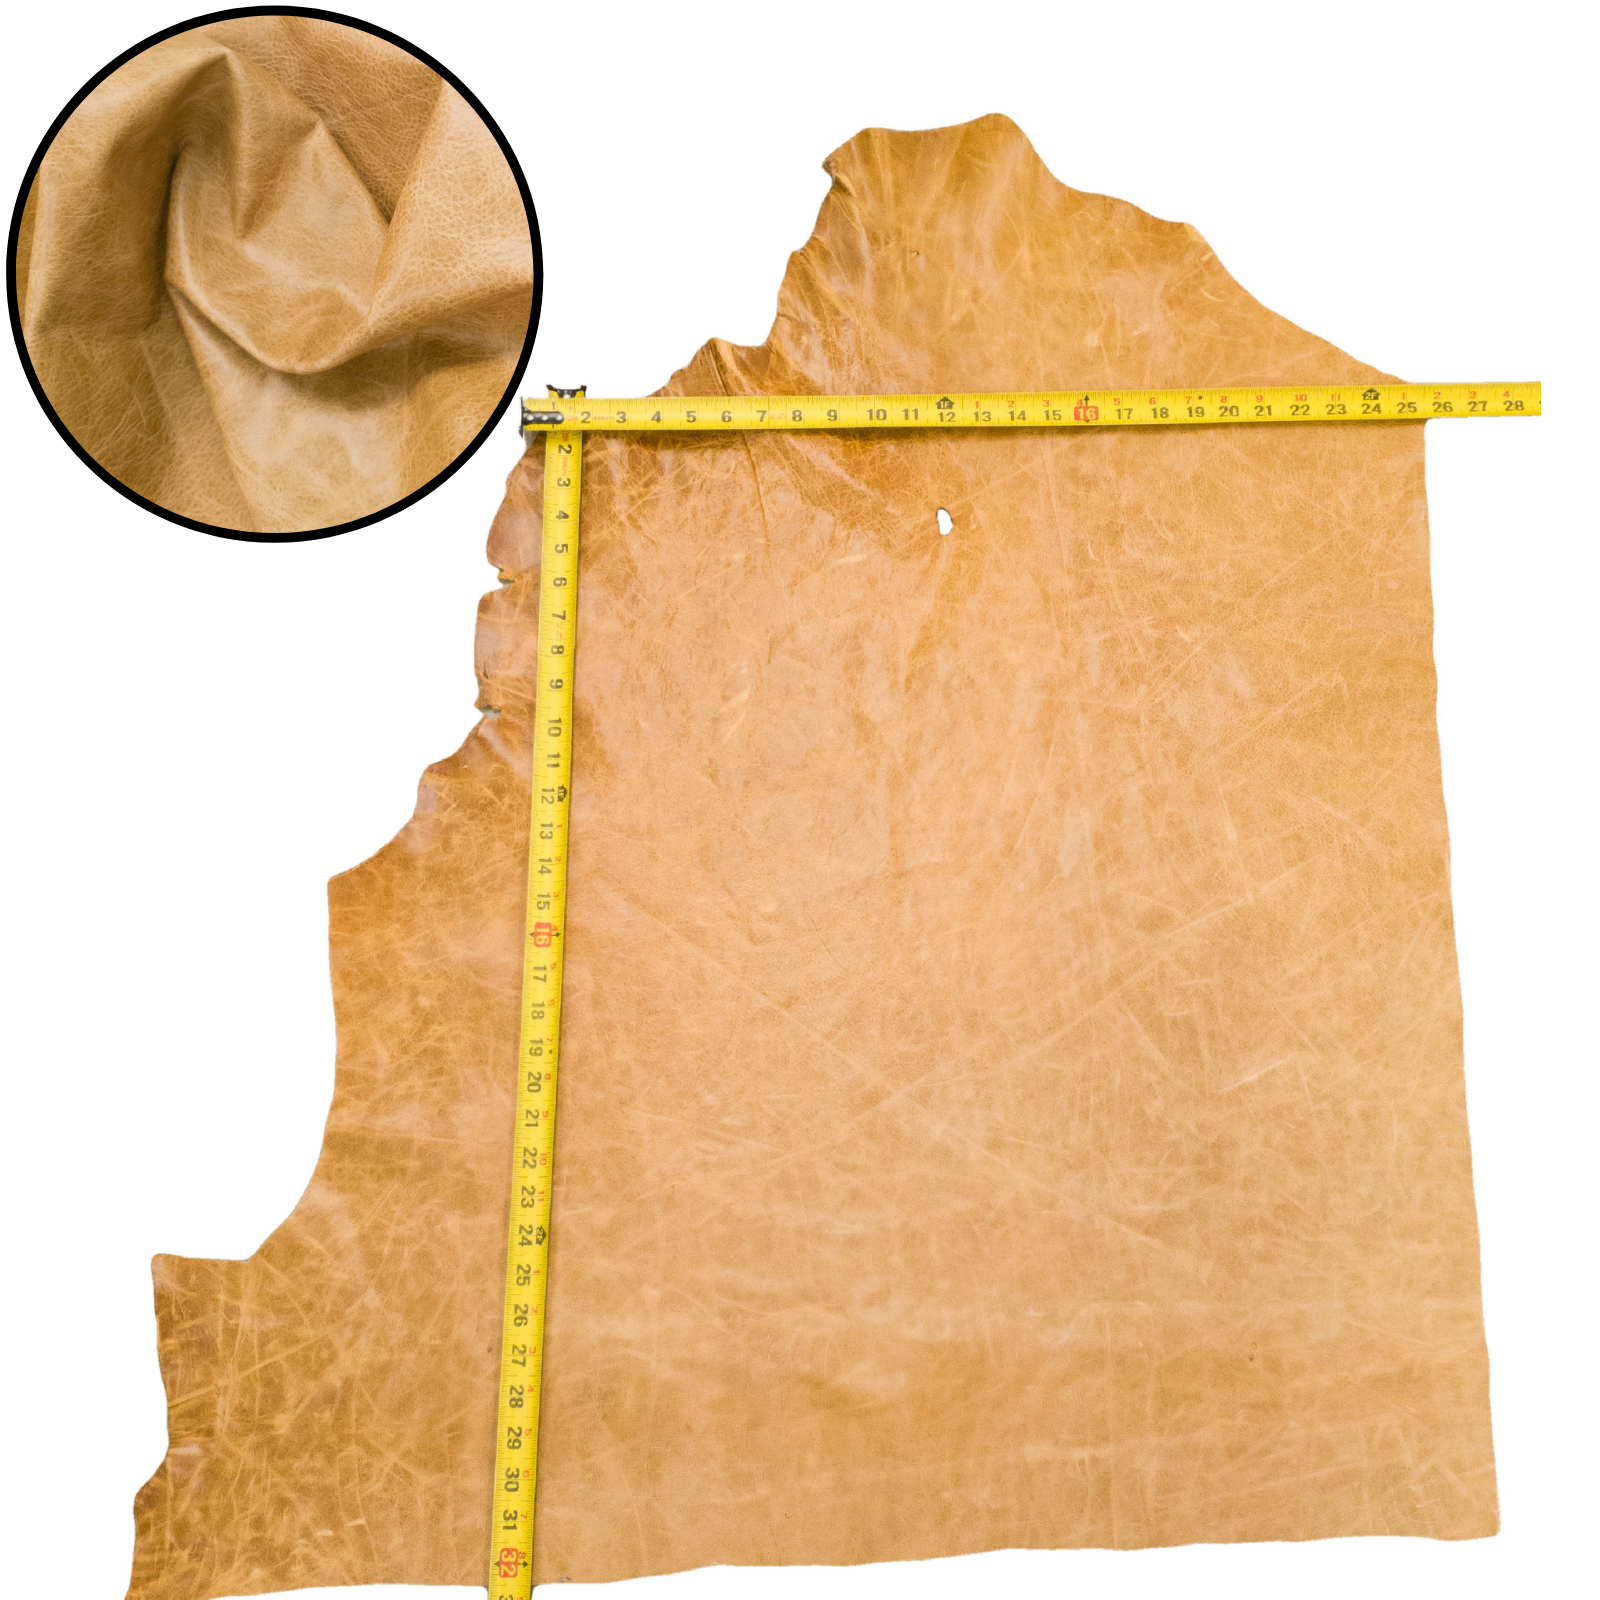 Light Browns, 4-20 Sq Ft Upholstery Cowhide Project Pieces, Beach Sand / 6 / 2 | The Leather Guy